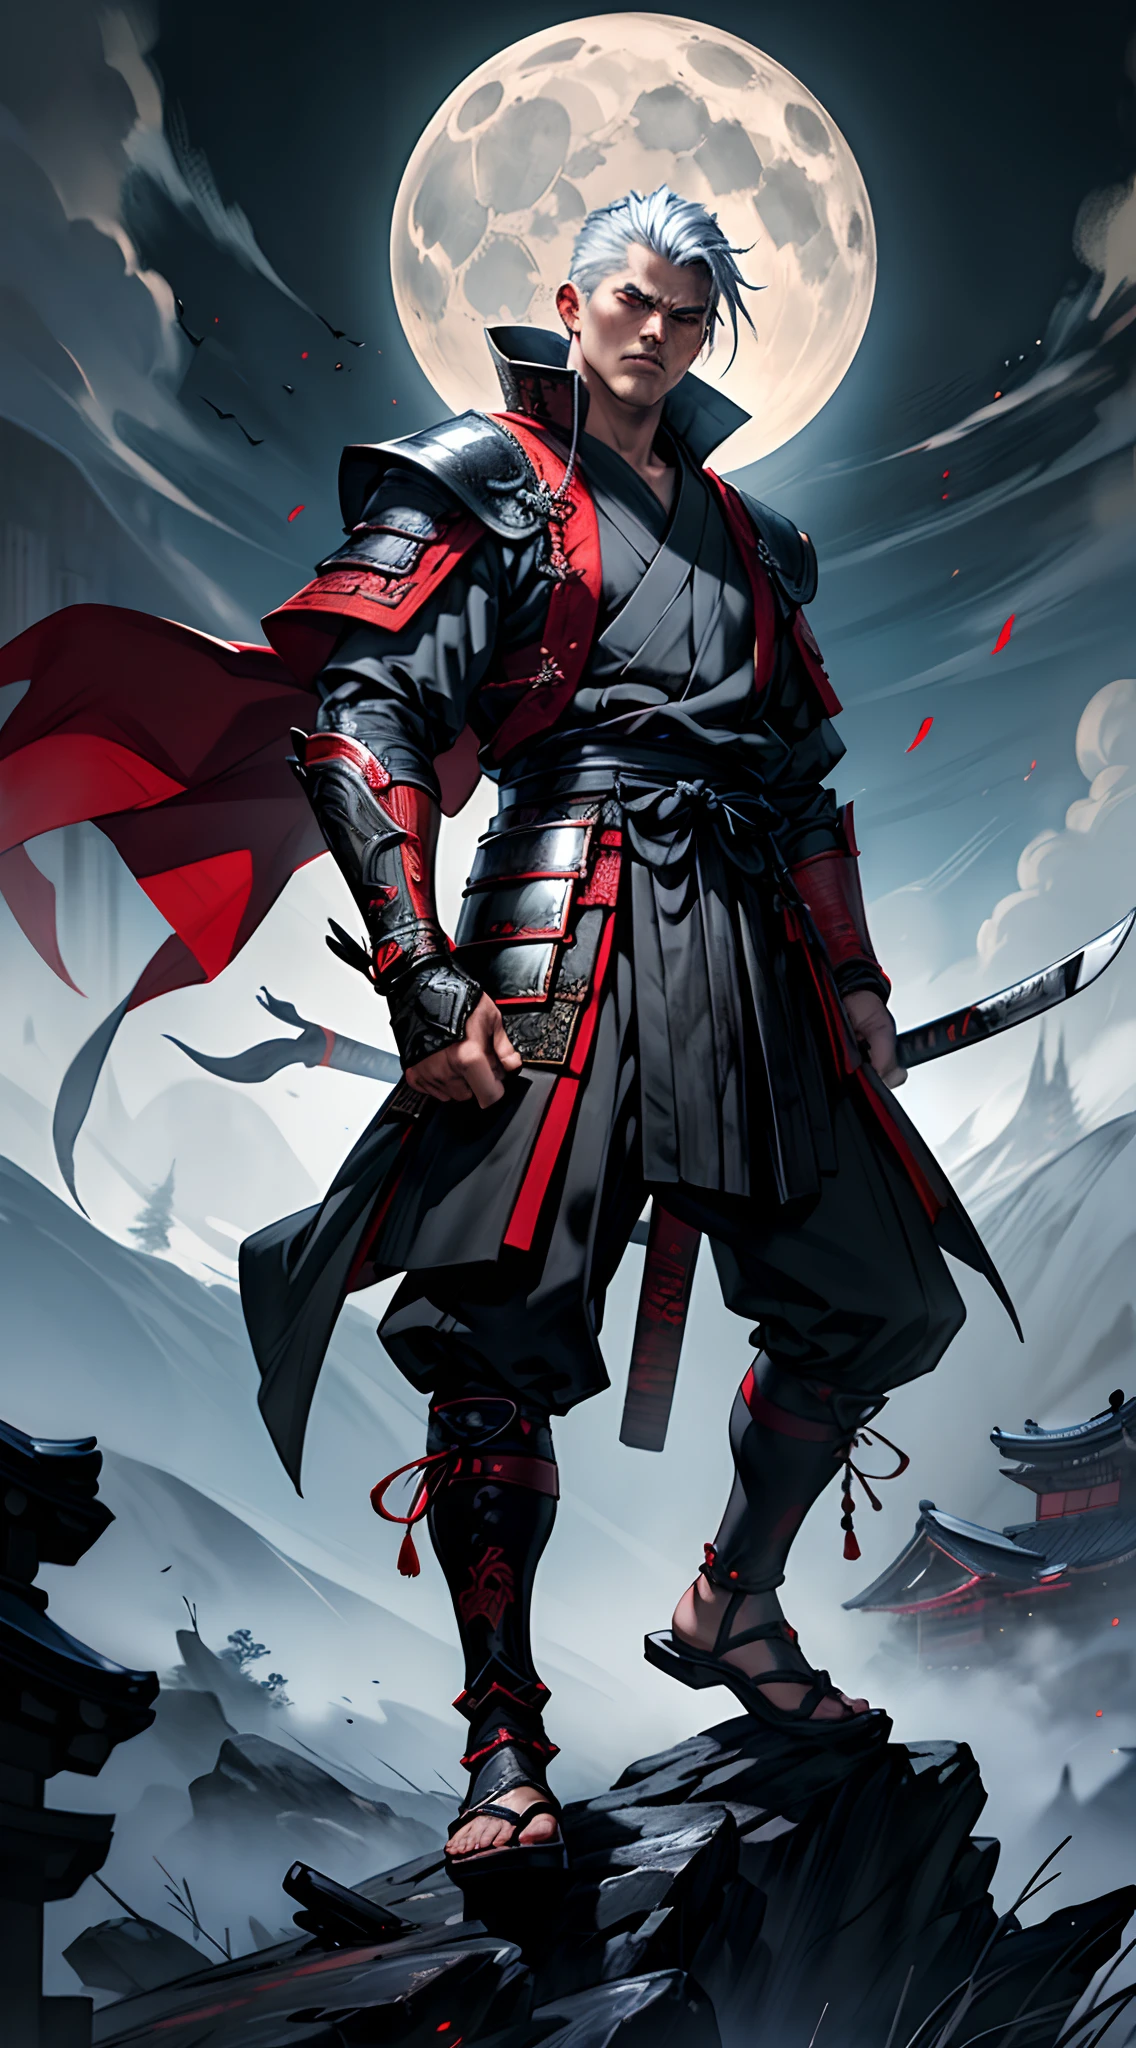 (Man warrior), (legendary assassin), (devils eyes), (best quality,photo-realistic), full body shot, look at viewer, white short hair, black and red, Japanese traditional art style, ink painting style, dark and mysterious atmosphere, moonlight, dramatic lighting, traditional Japanese tattoo, samurai armor, lone warrior, dramatic moon background ,depth and focus on the main character,